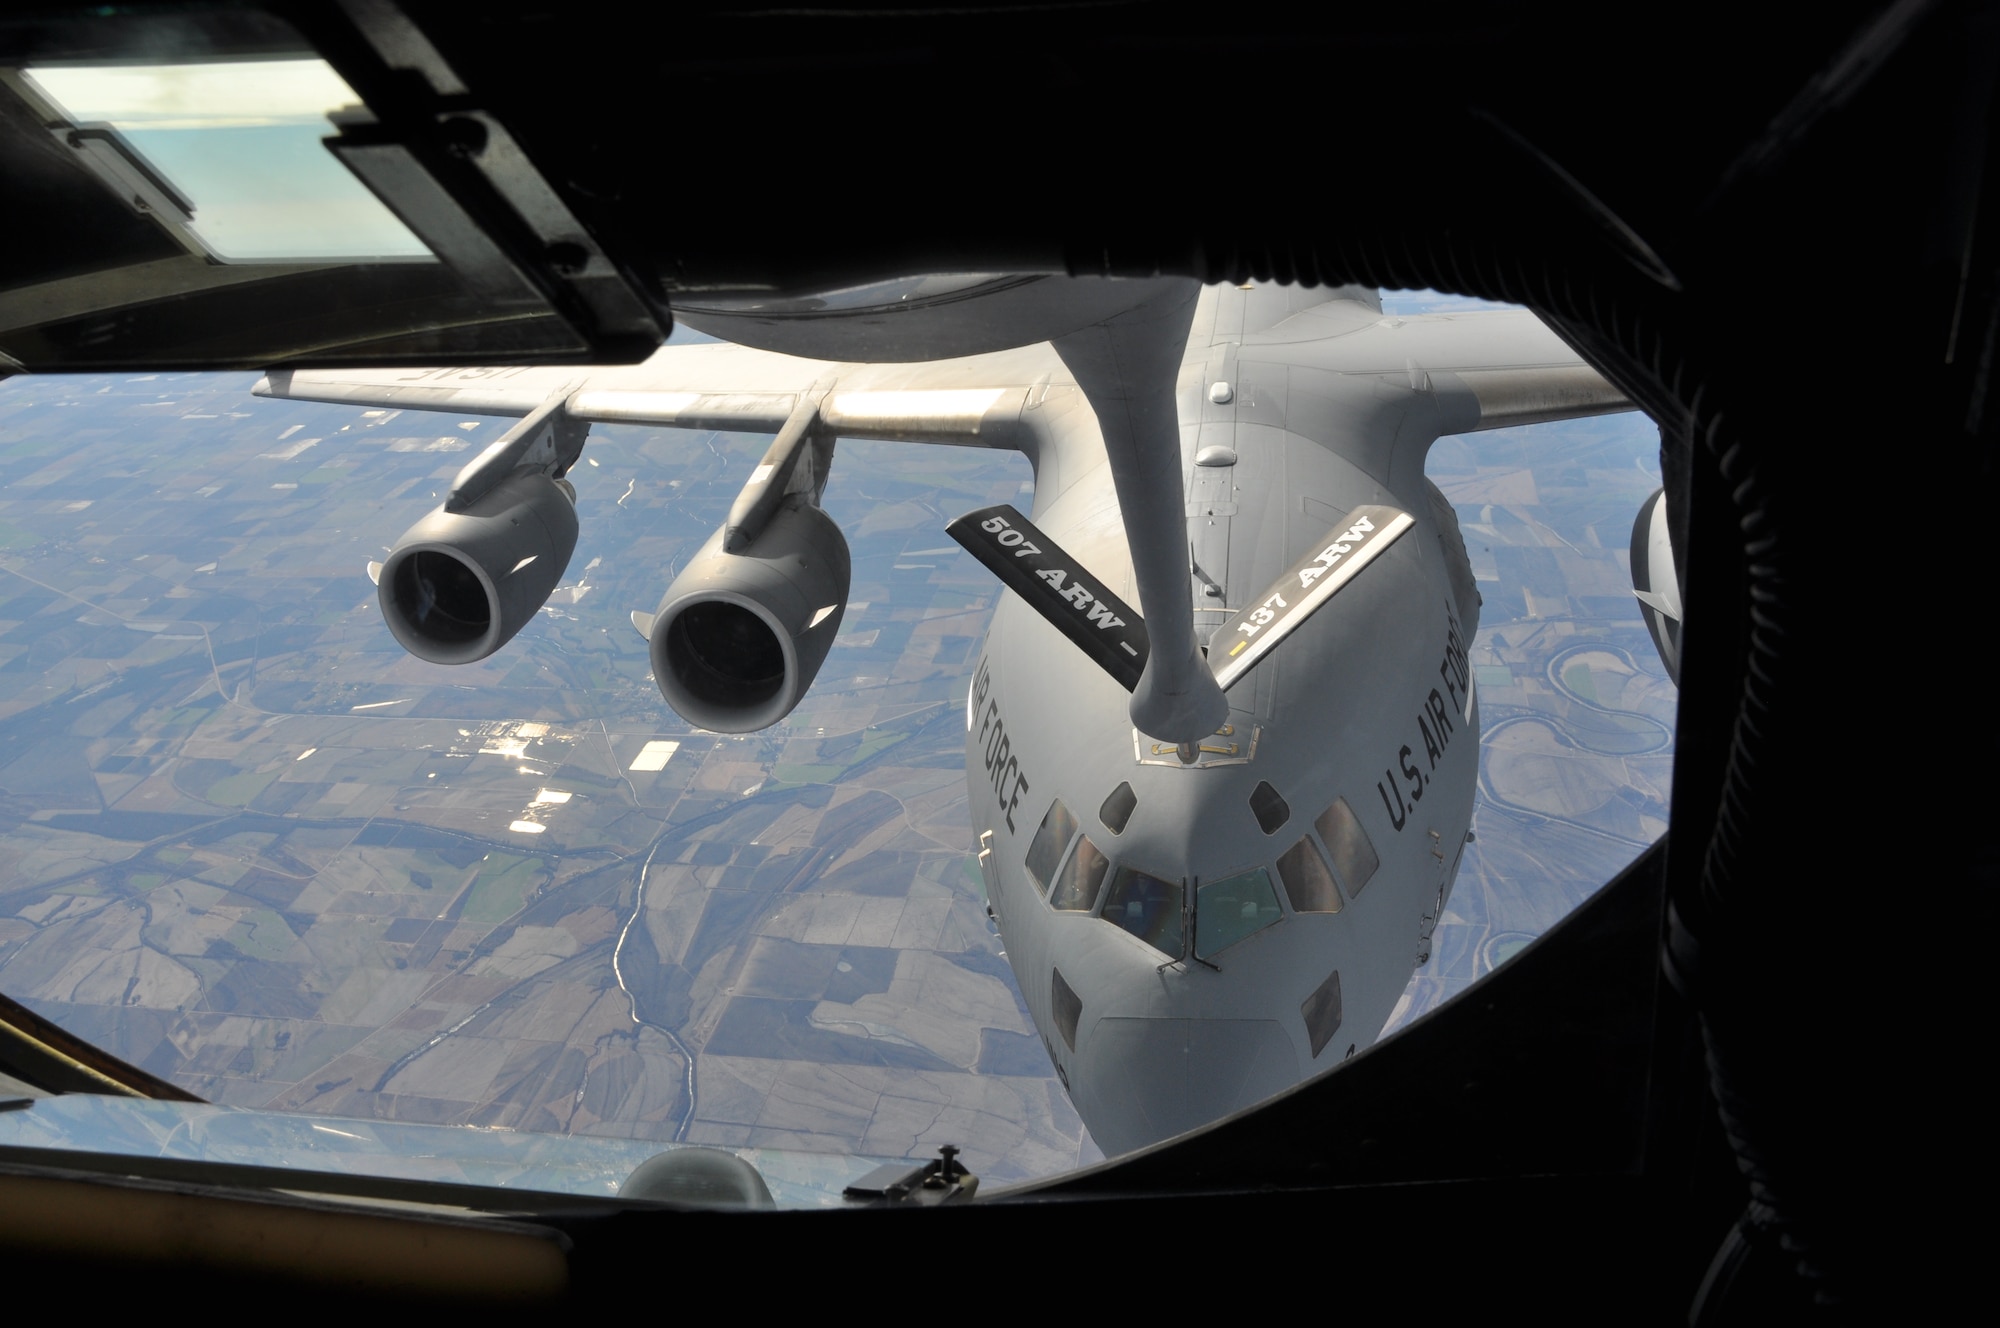 A C-17 Globemaster III receives fuel from a 507th Air Refueling Wing KC-135 Stratotanker in a recent training mission.  The 507th ARW received command responsibility for the 730th Air Mobility Training Squadron, the first classic associate unit in the Air Force. Reservists in the unit work next to active duty Airmen of the 97th Air Mobility Wing, training C-17 and KC-135 aircrew members for Air Education and Training Command. (U.S. Air Force Photo/Maj. Jon Quinlan) 